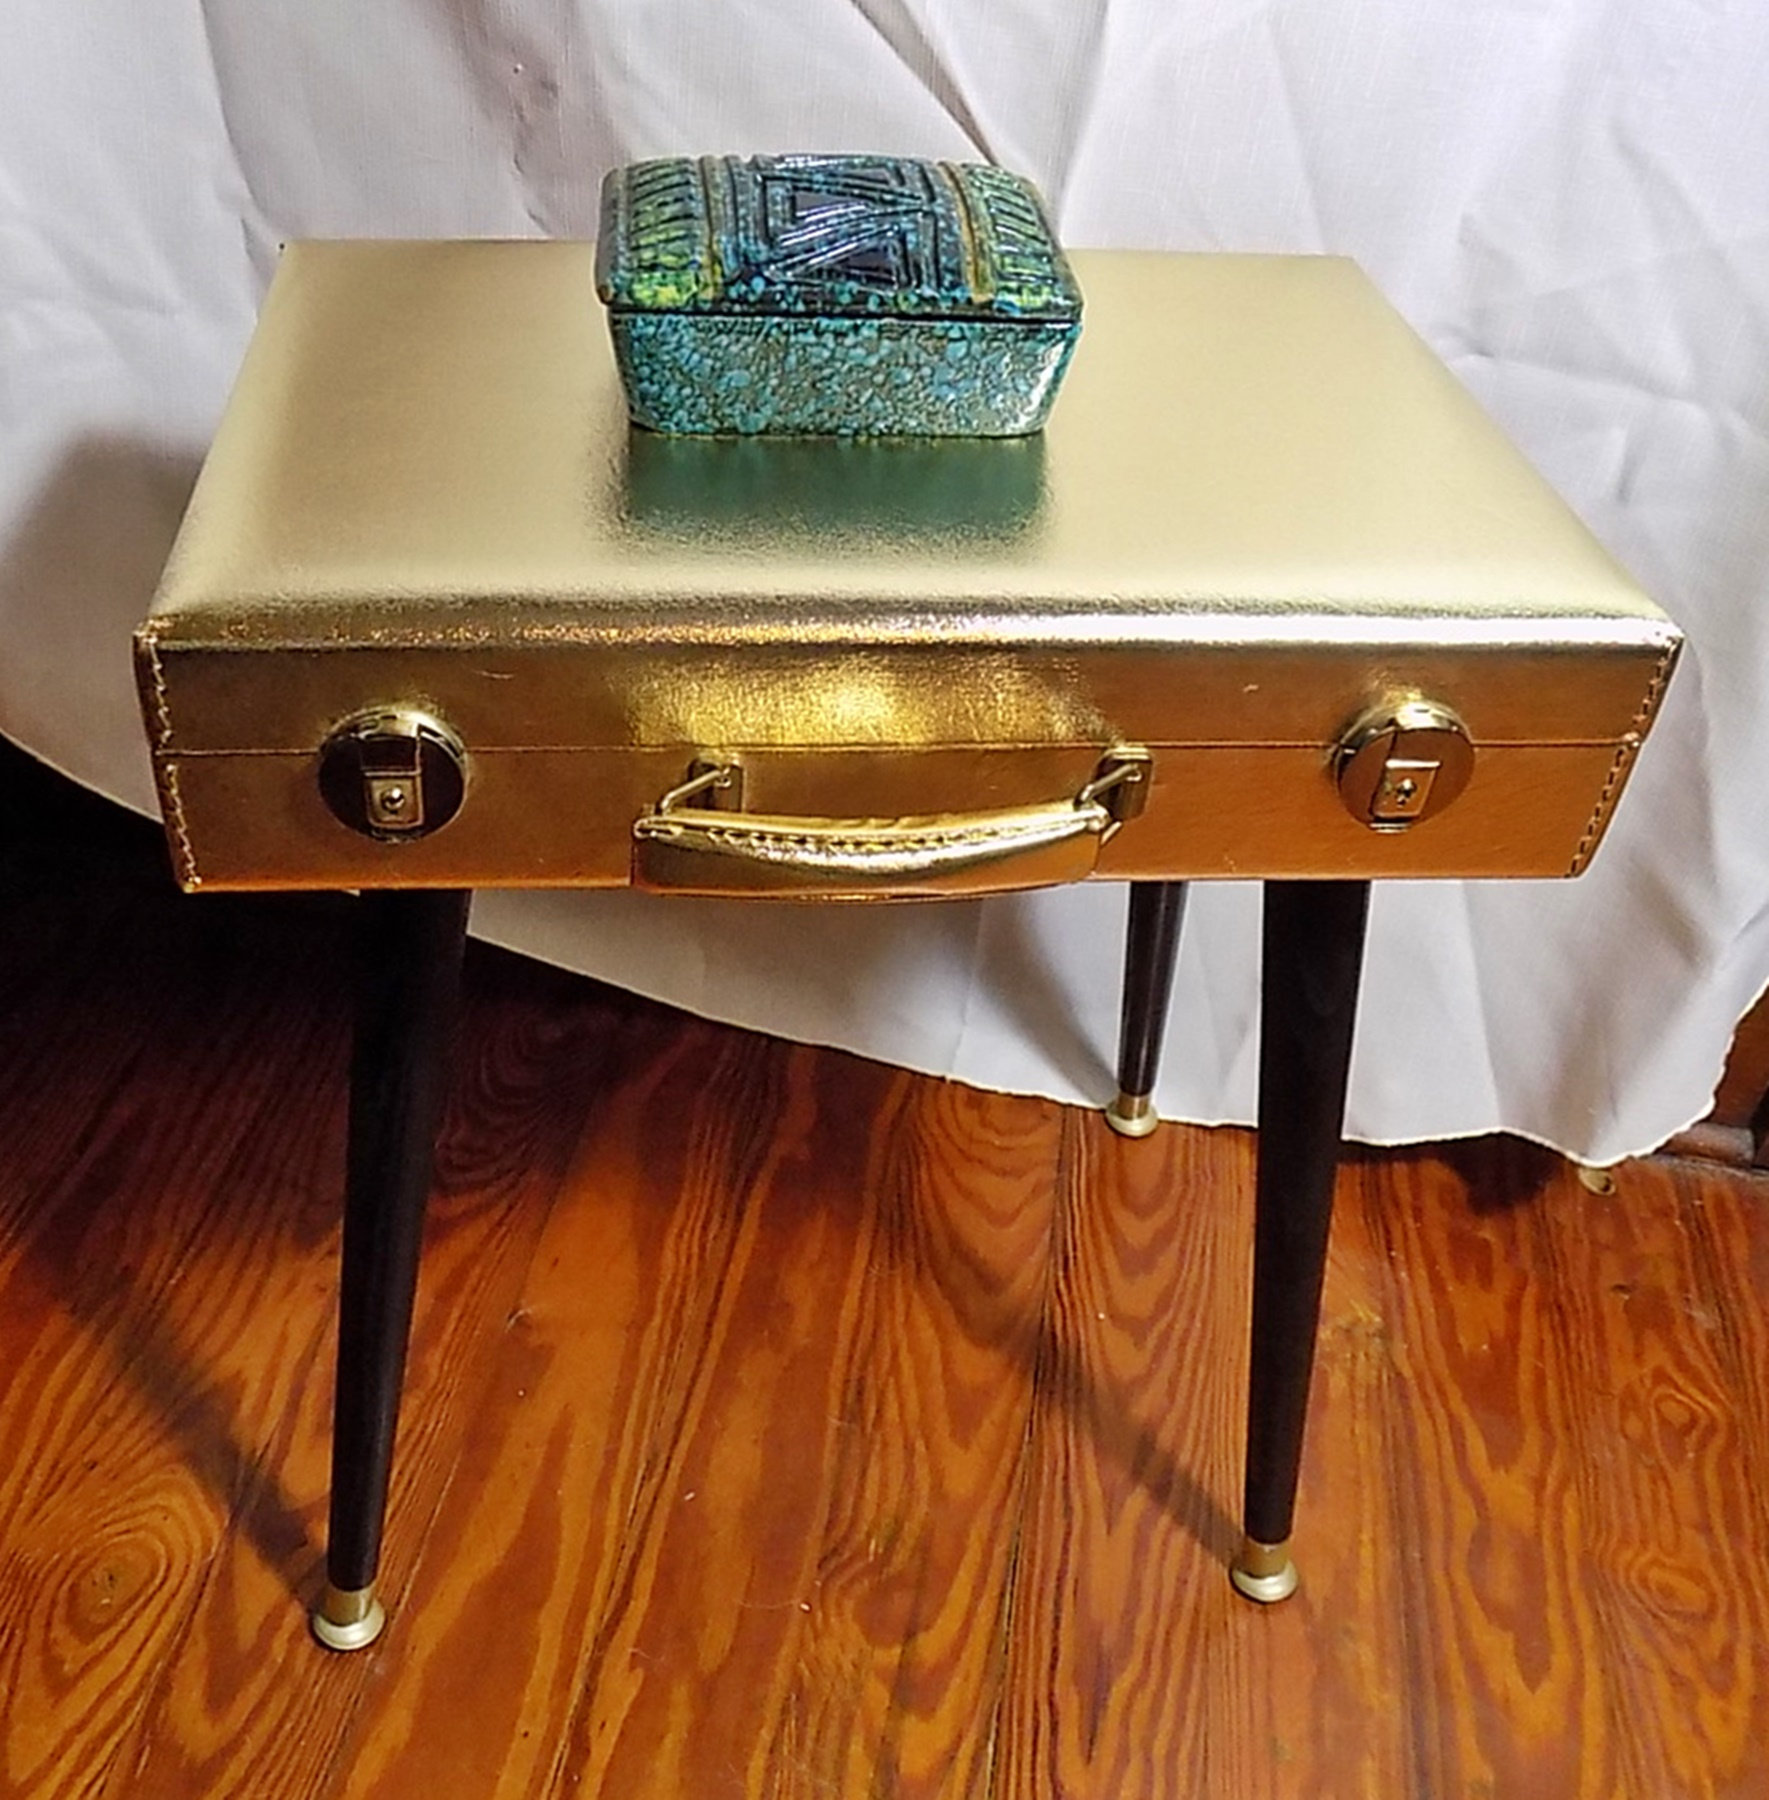 upcycled gold briefcase accent table purple lining wooden legs etsy fullxfull okgj structube coffee hobby lobby decorations vanity blue outdoor and chairs oval side with drawer